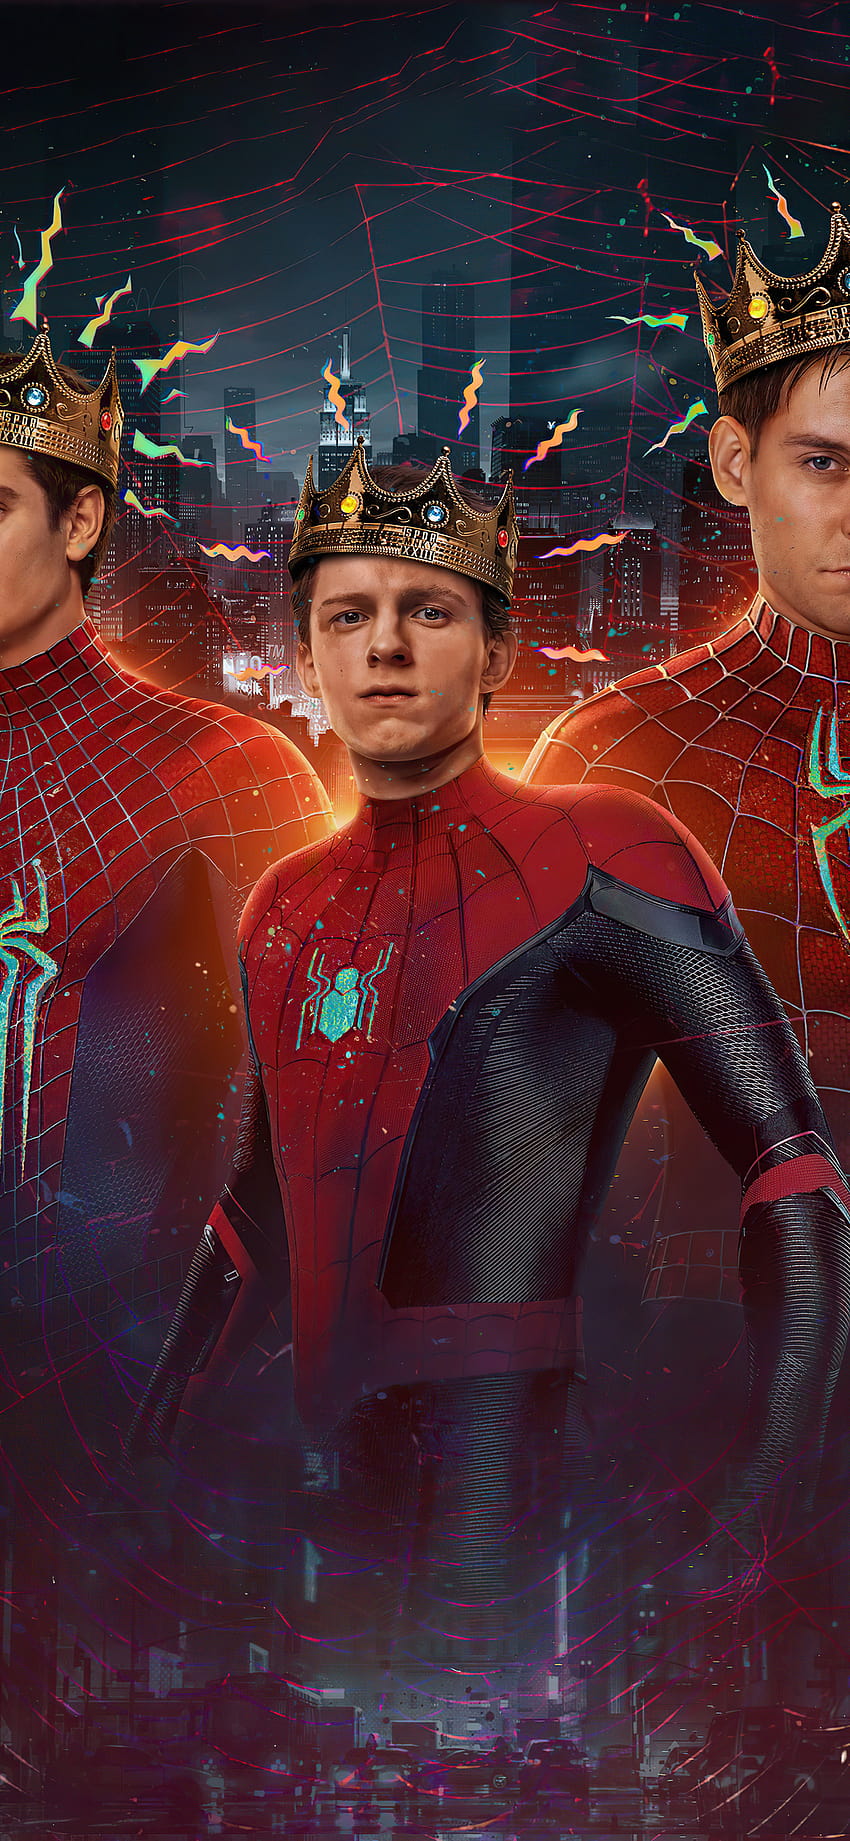 1125x2436 SpiderManNoWayHome Peterparker TobeyMaguire AndrewGarfield TomHolland Spiderverse Iphone XS,Iphone 10,Iphone X , พื้นหลัง, และ วอลล์เปเปอร์โทรศัพท์ HD